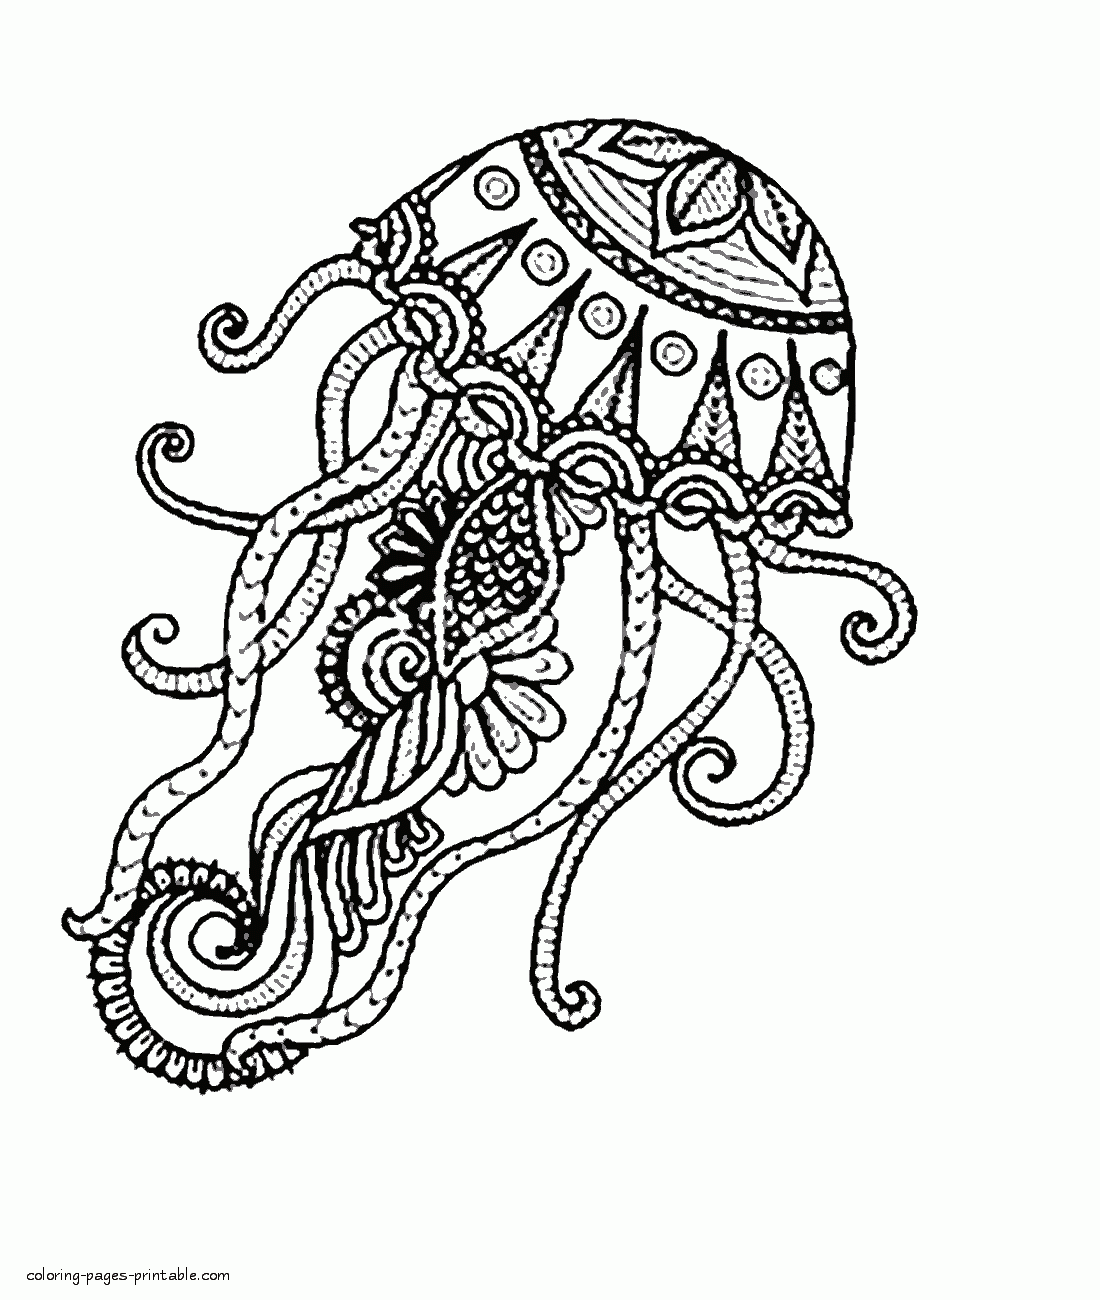 Jellyfish Adult Coloring Page Coloring Pages Printable Com